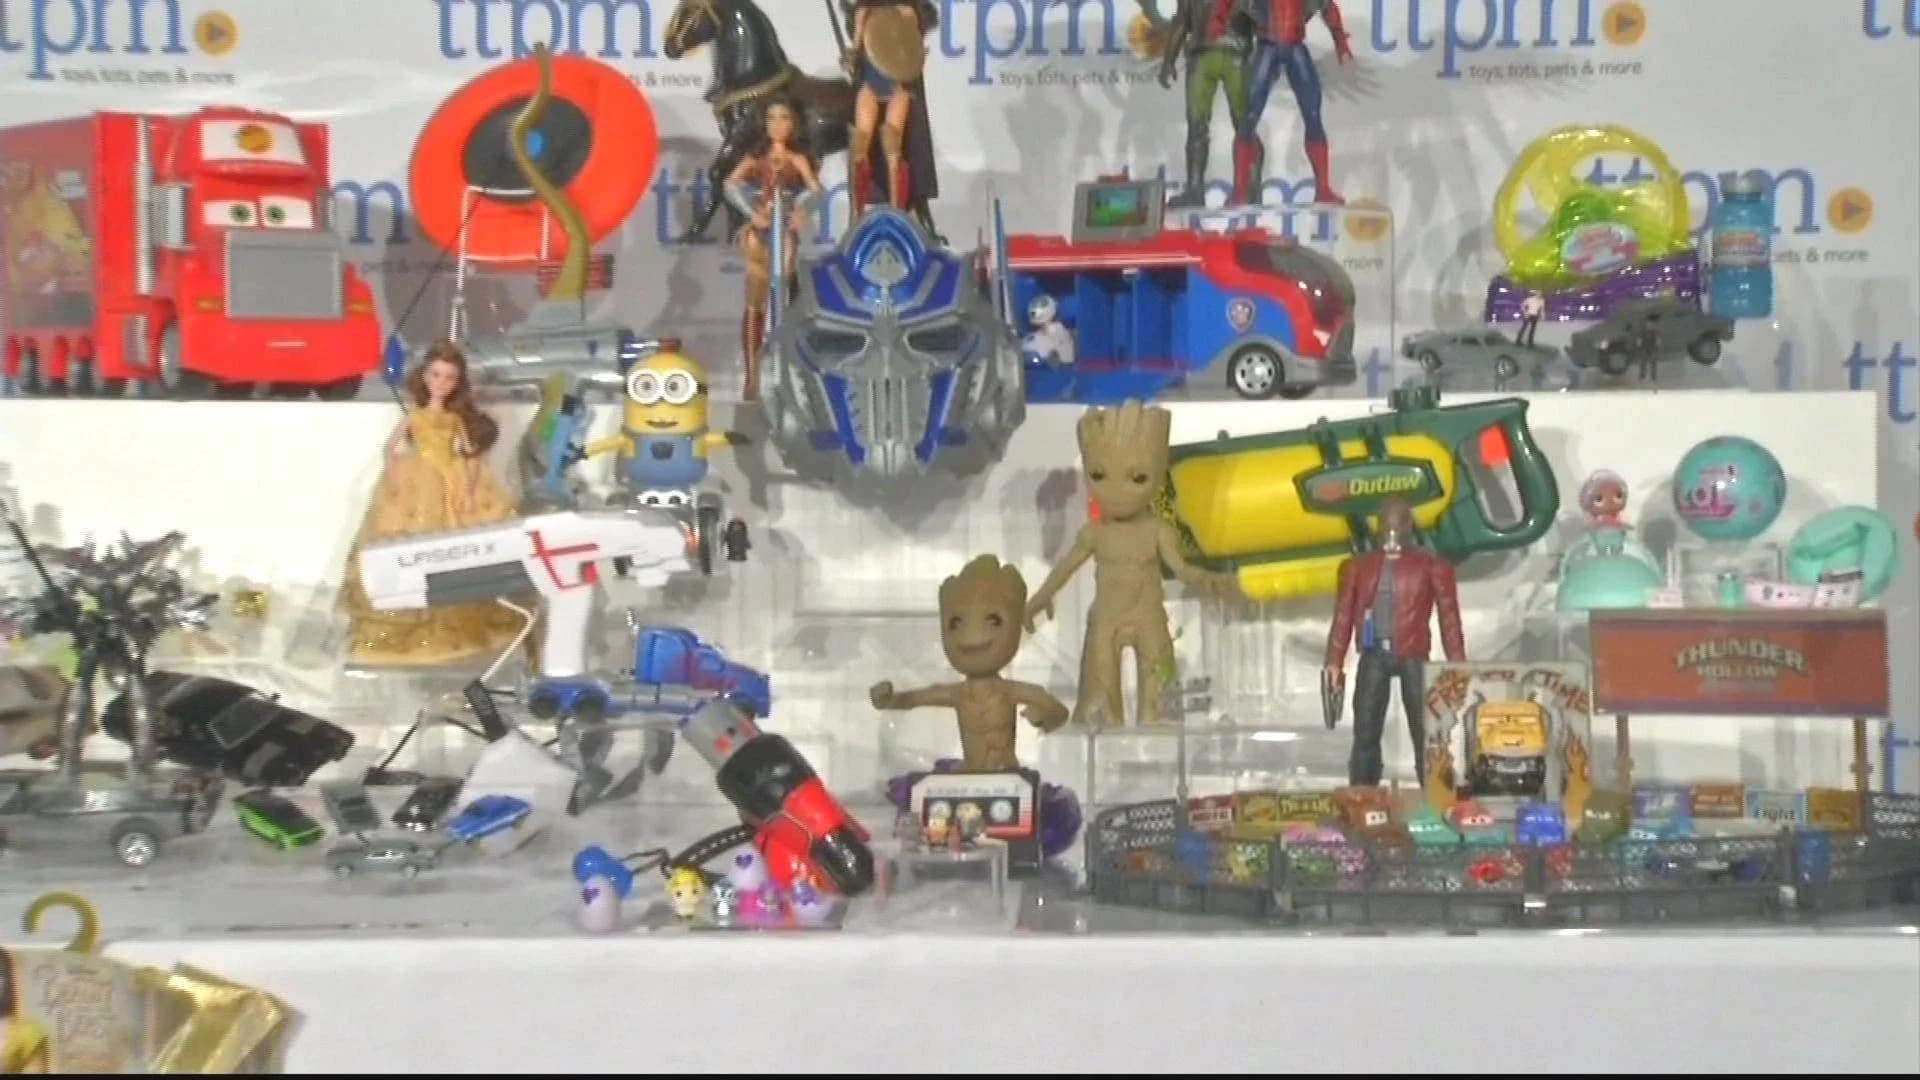 News 12 gets sneak peak of the latest toy trends